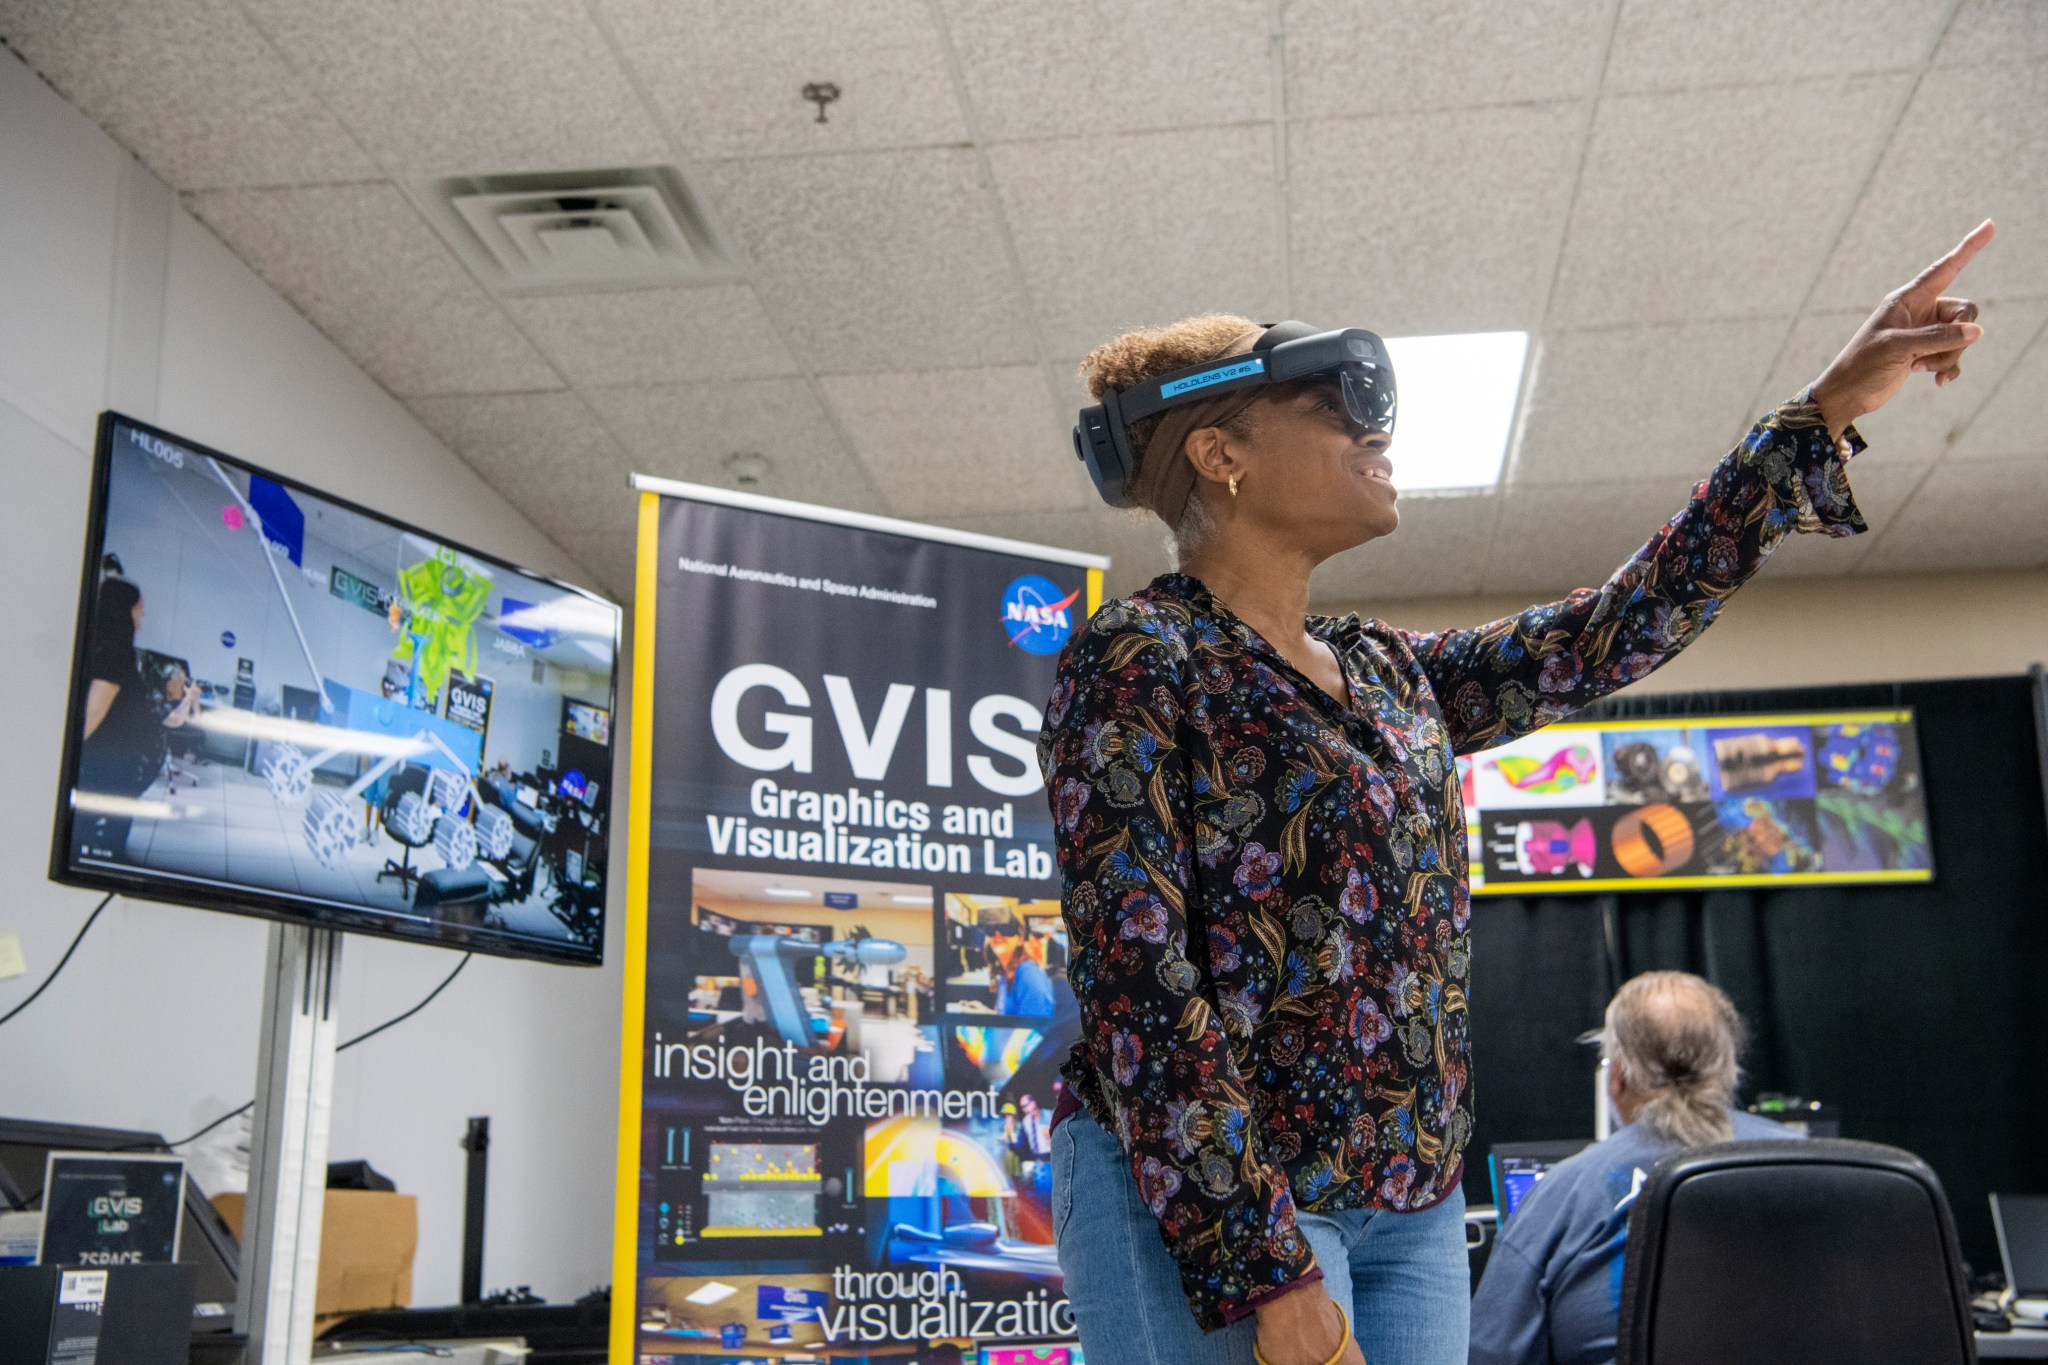 A NASA Engineer collaborates with Shasta High School students during the final presentations of the student’s mission concepts at the Graphics and Visualization Lab at NASA’s Glenn Research Center.